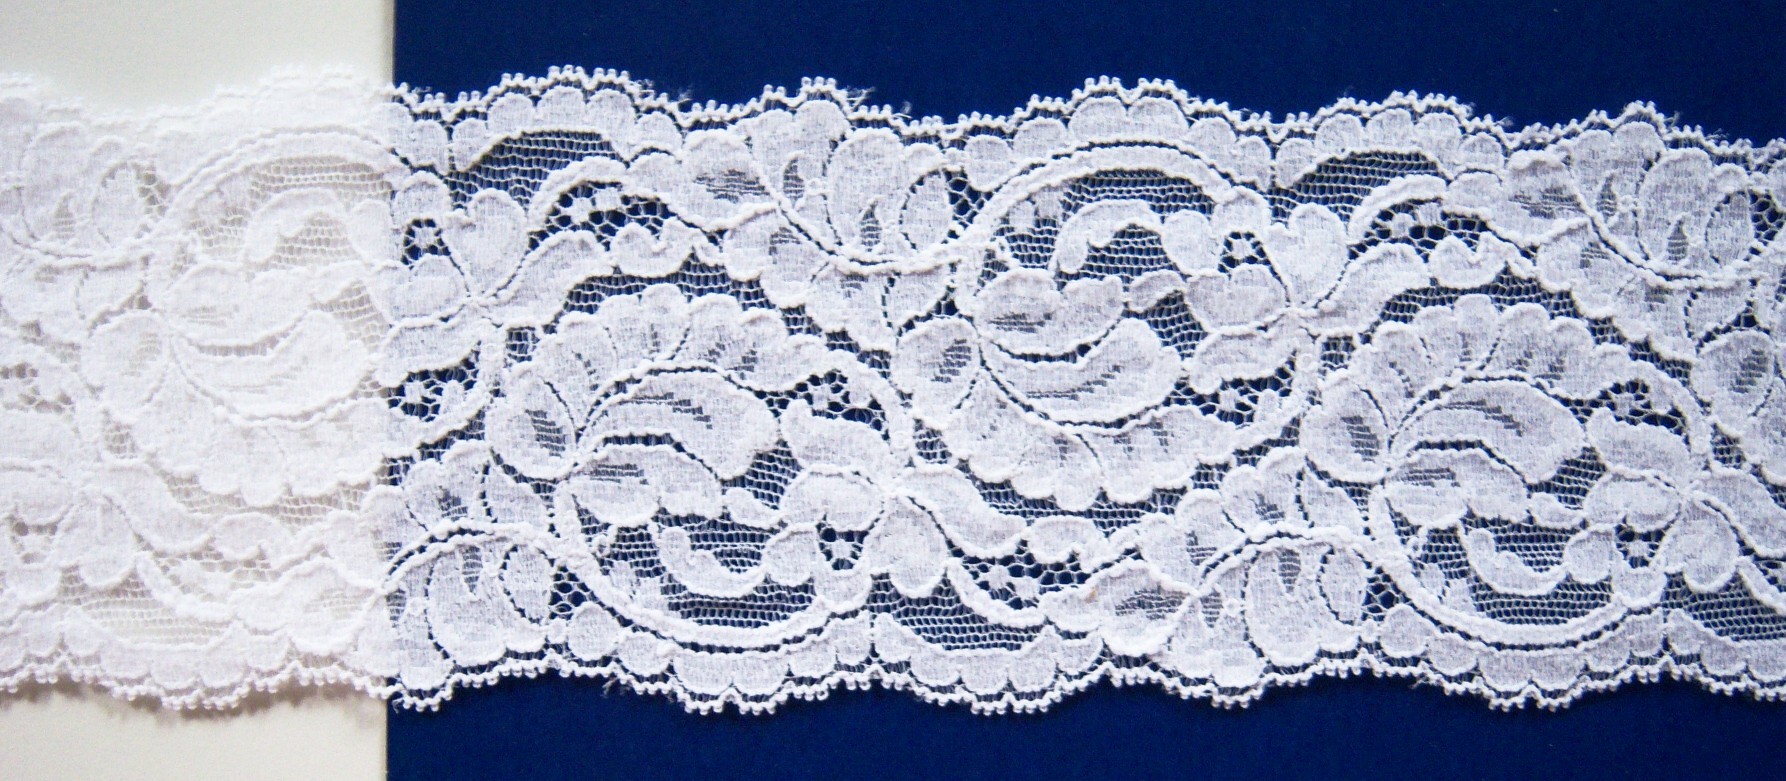 New Maid White 3 1/2" Stretch Lace